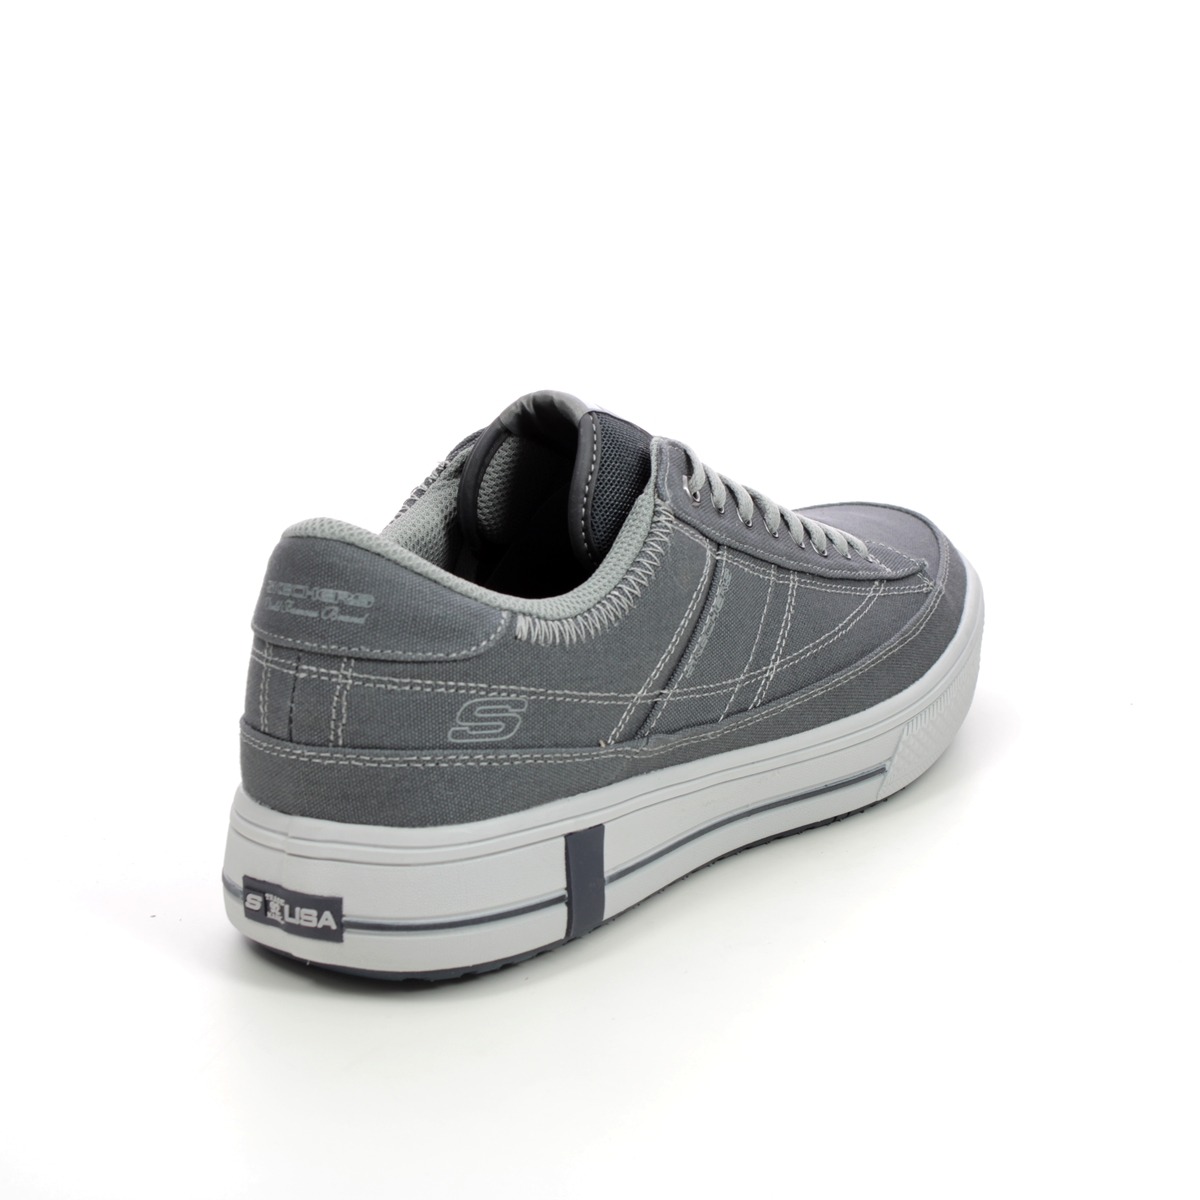 Skechers Arcade Chat 3.0 237248 trainers